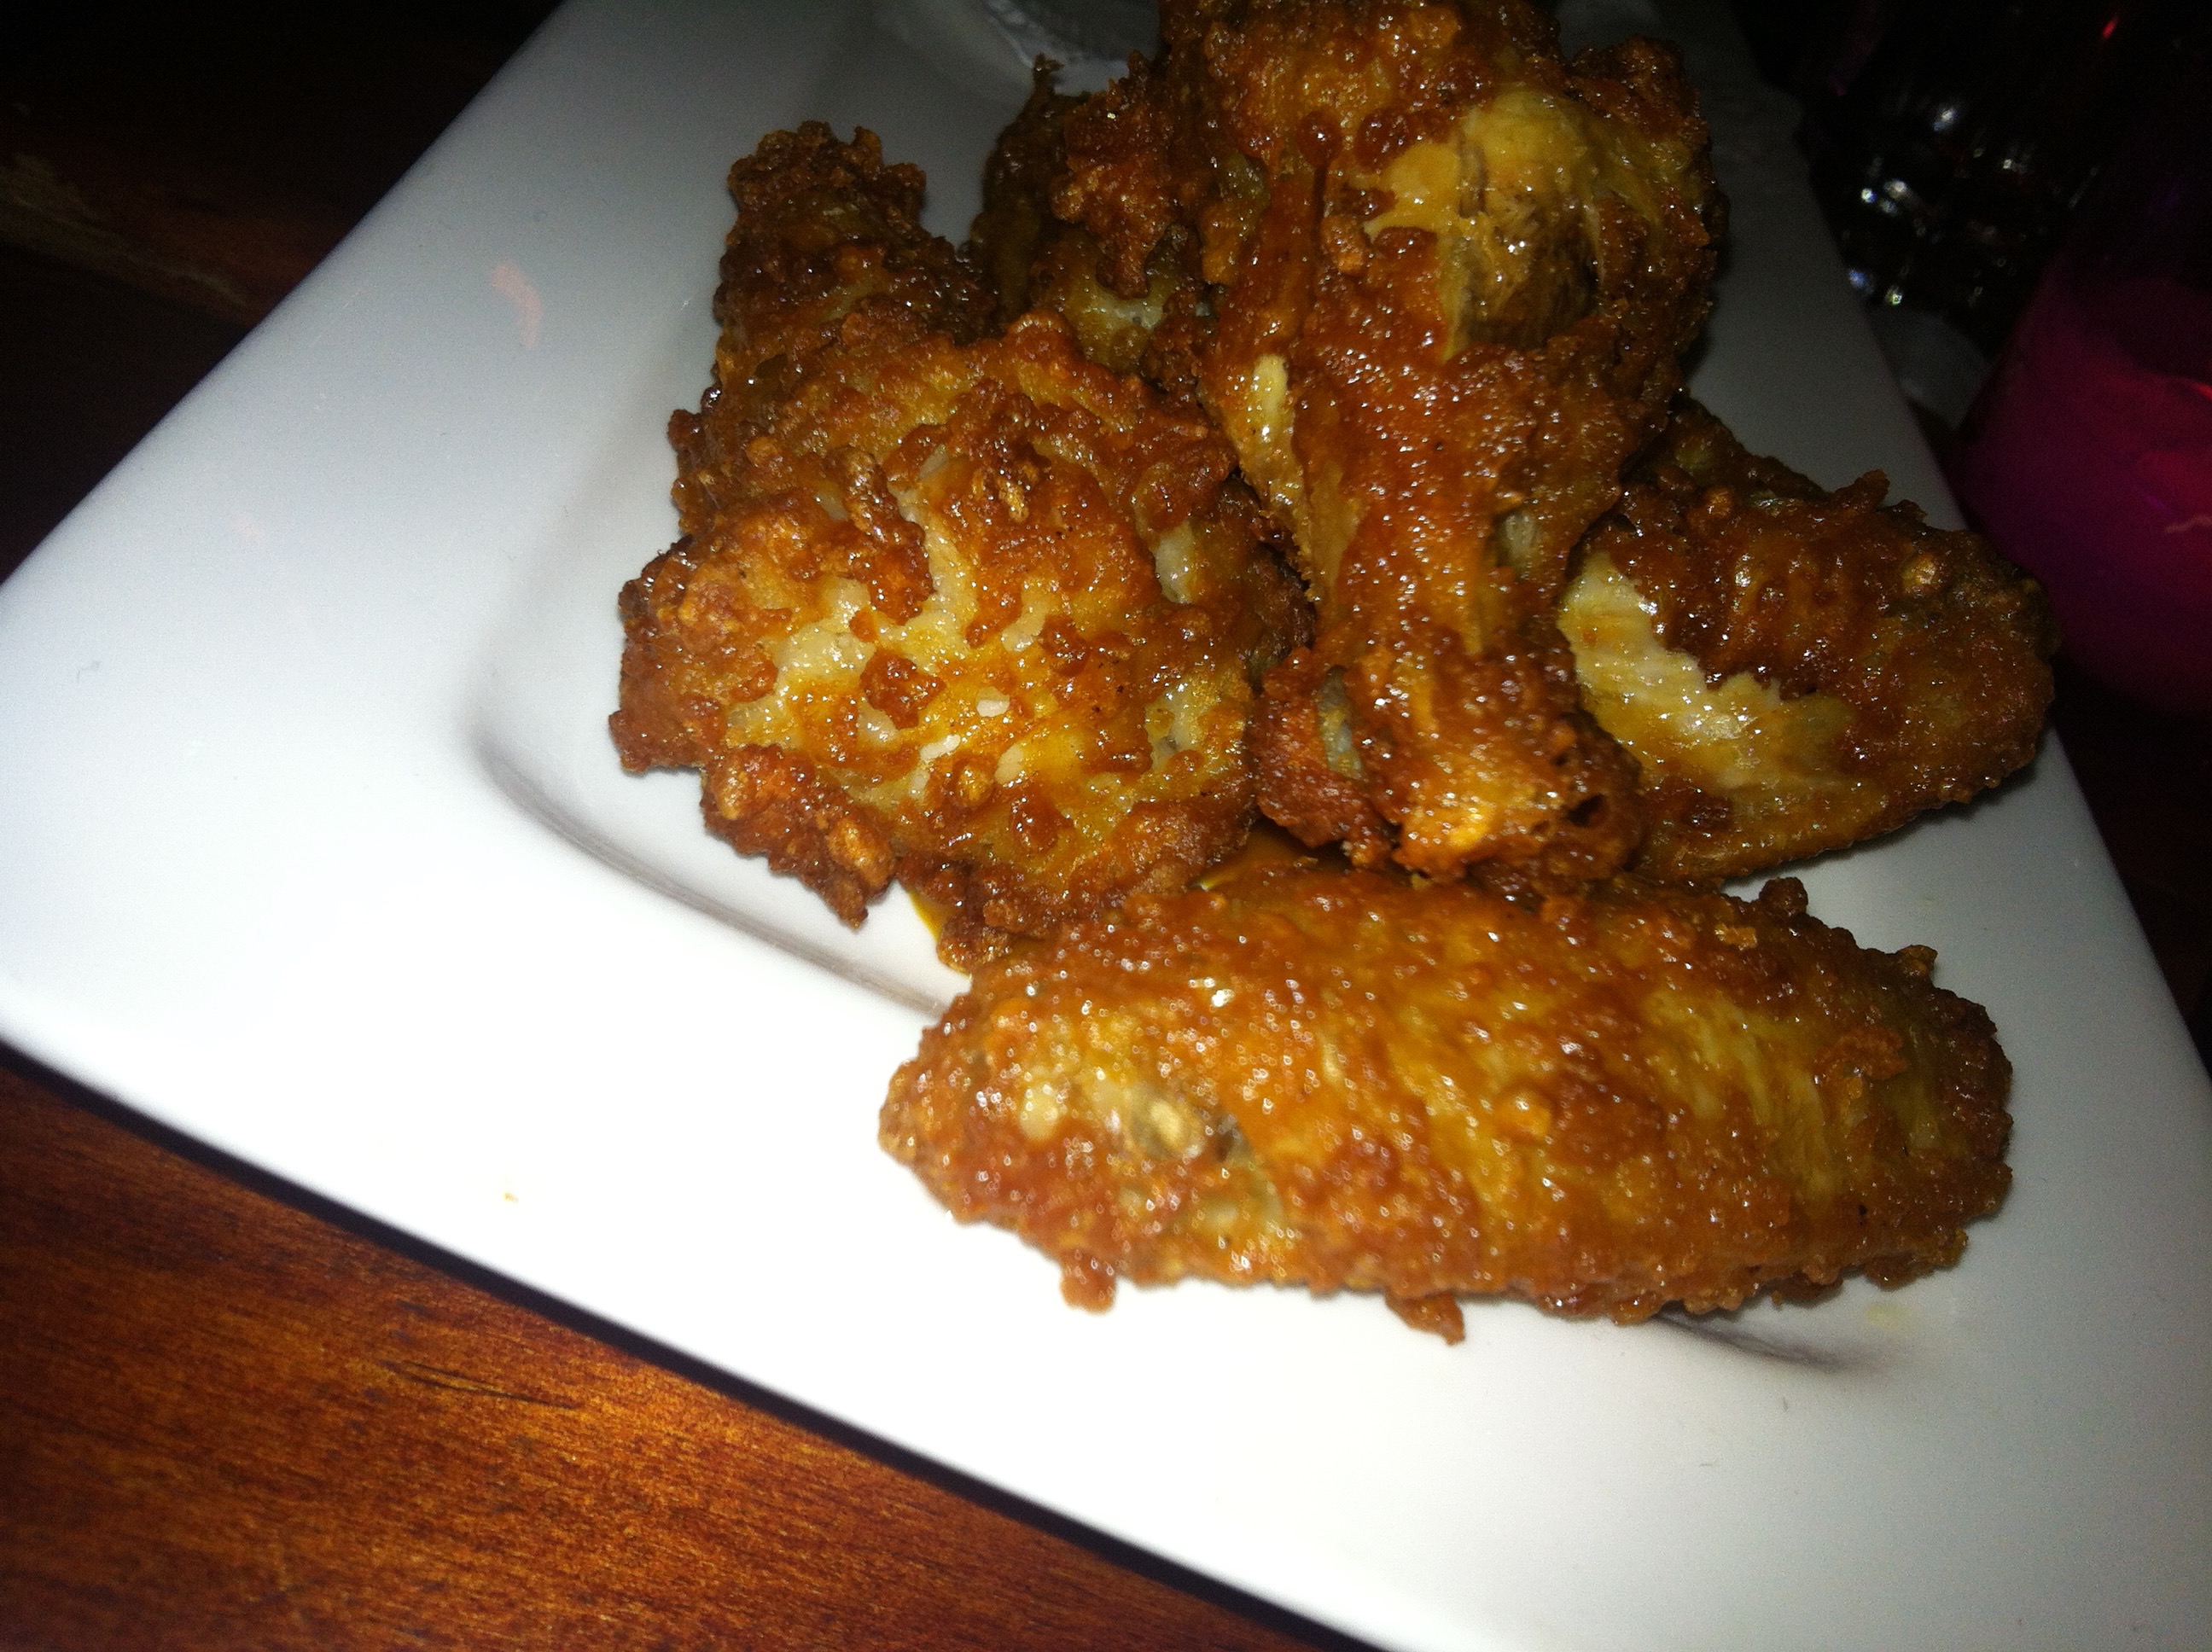 WIngs at Amber Gramercy